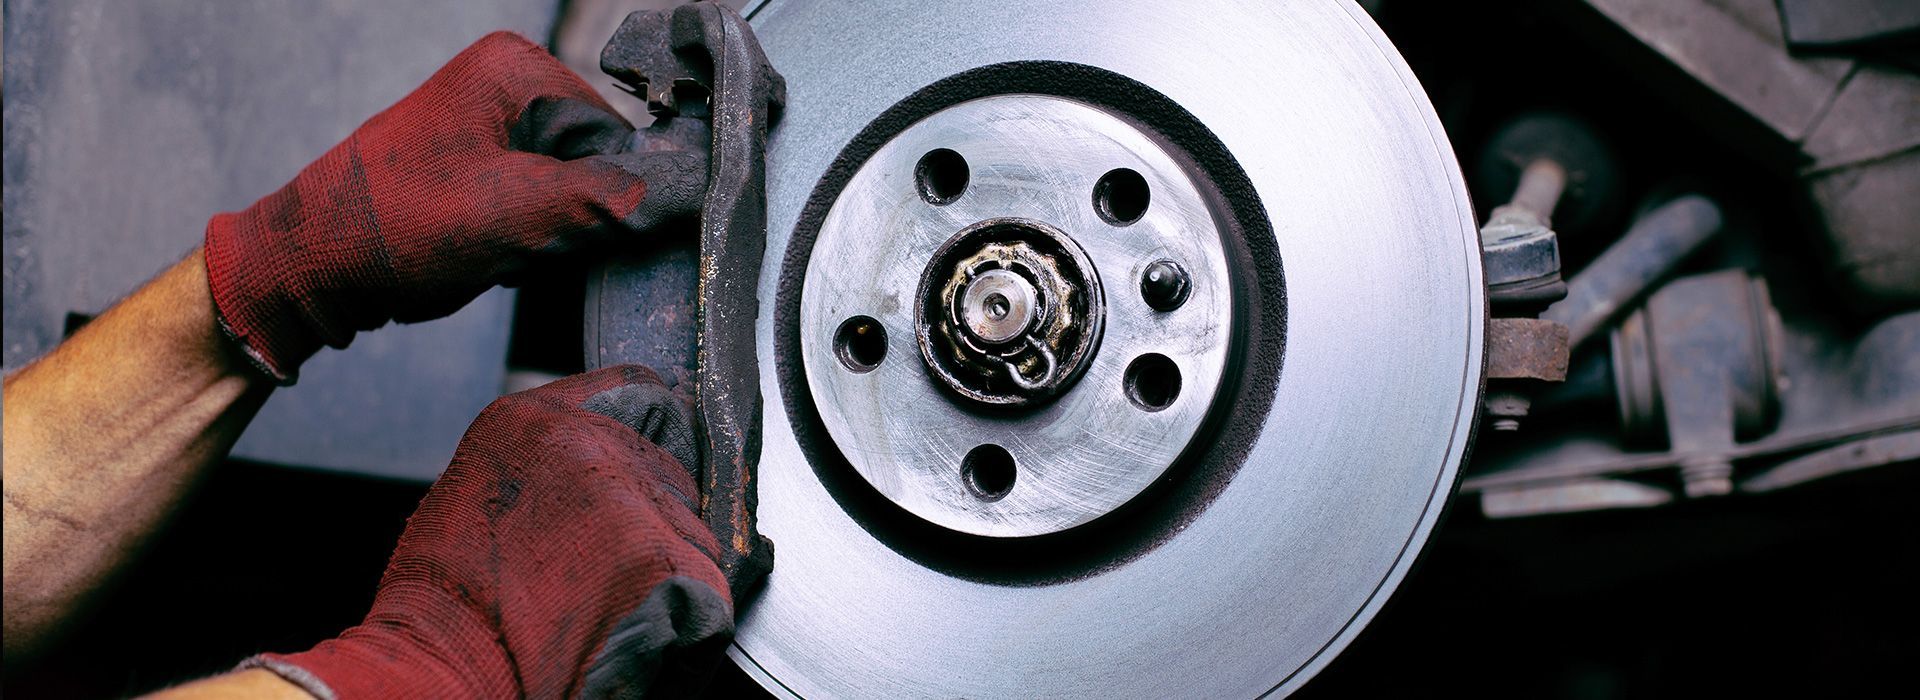 a person wearing red gloves is working on a brake disc